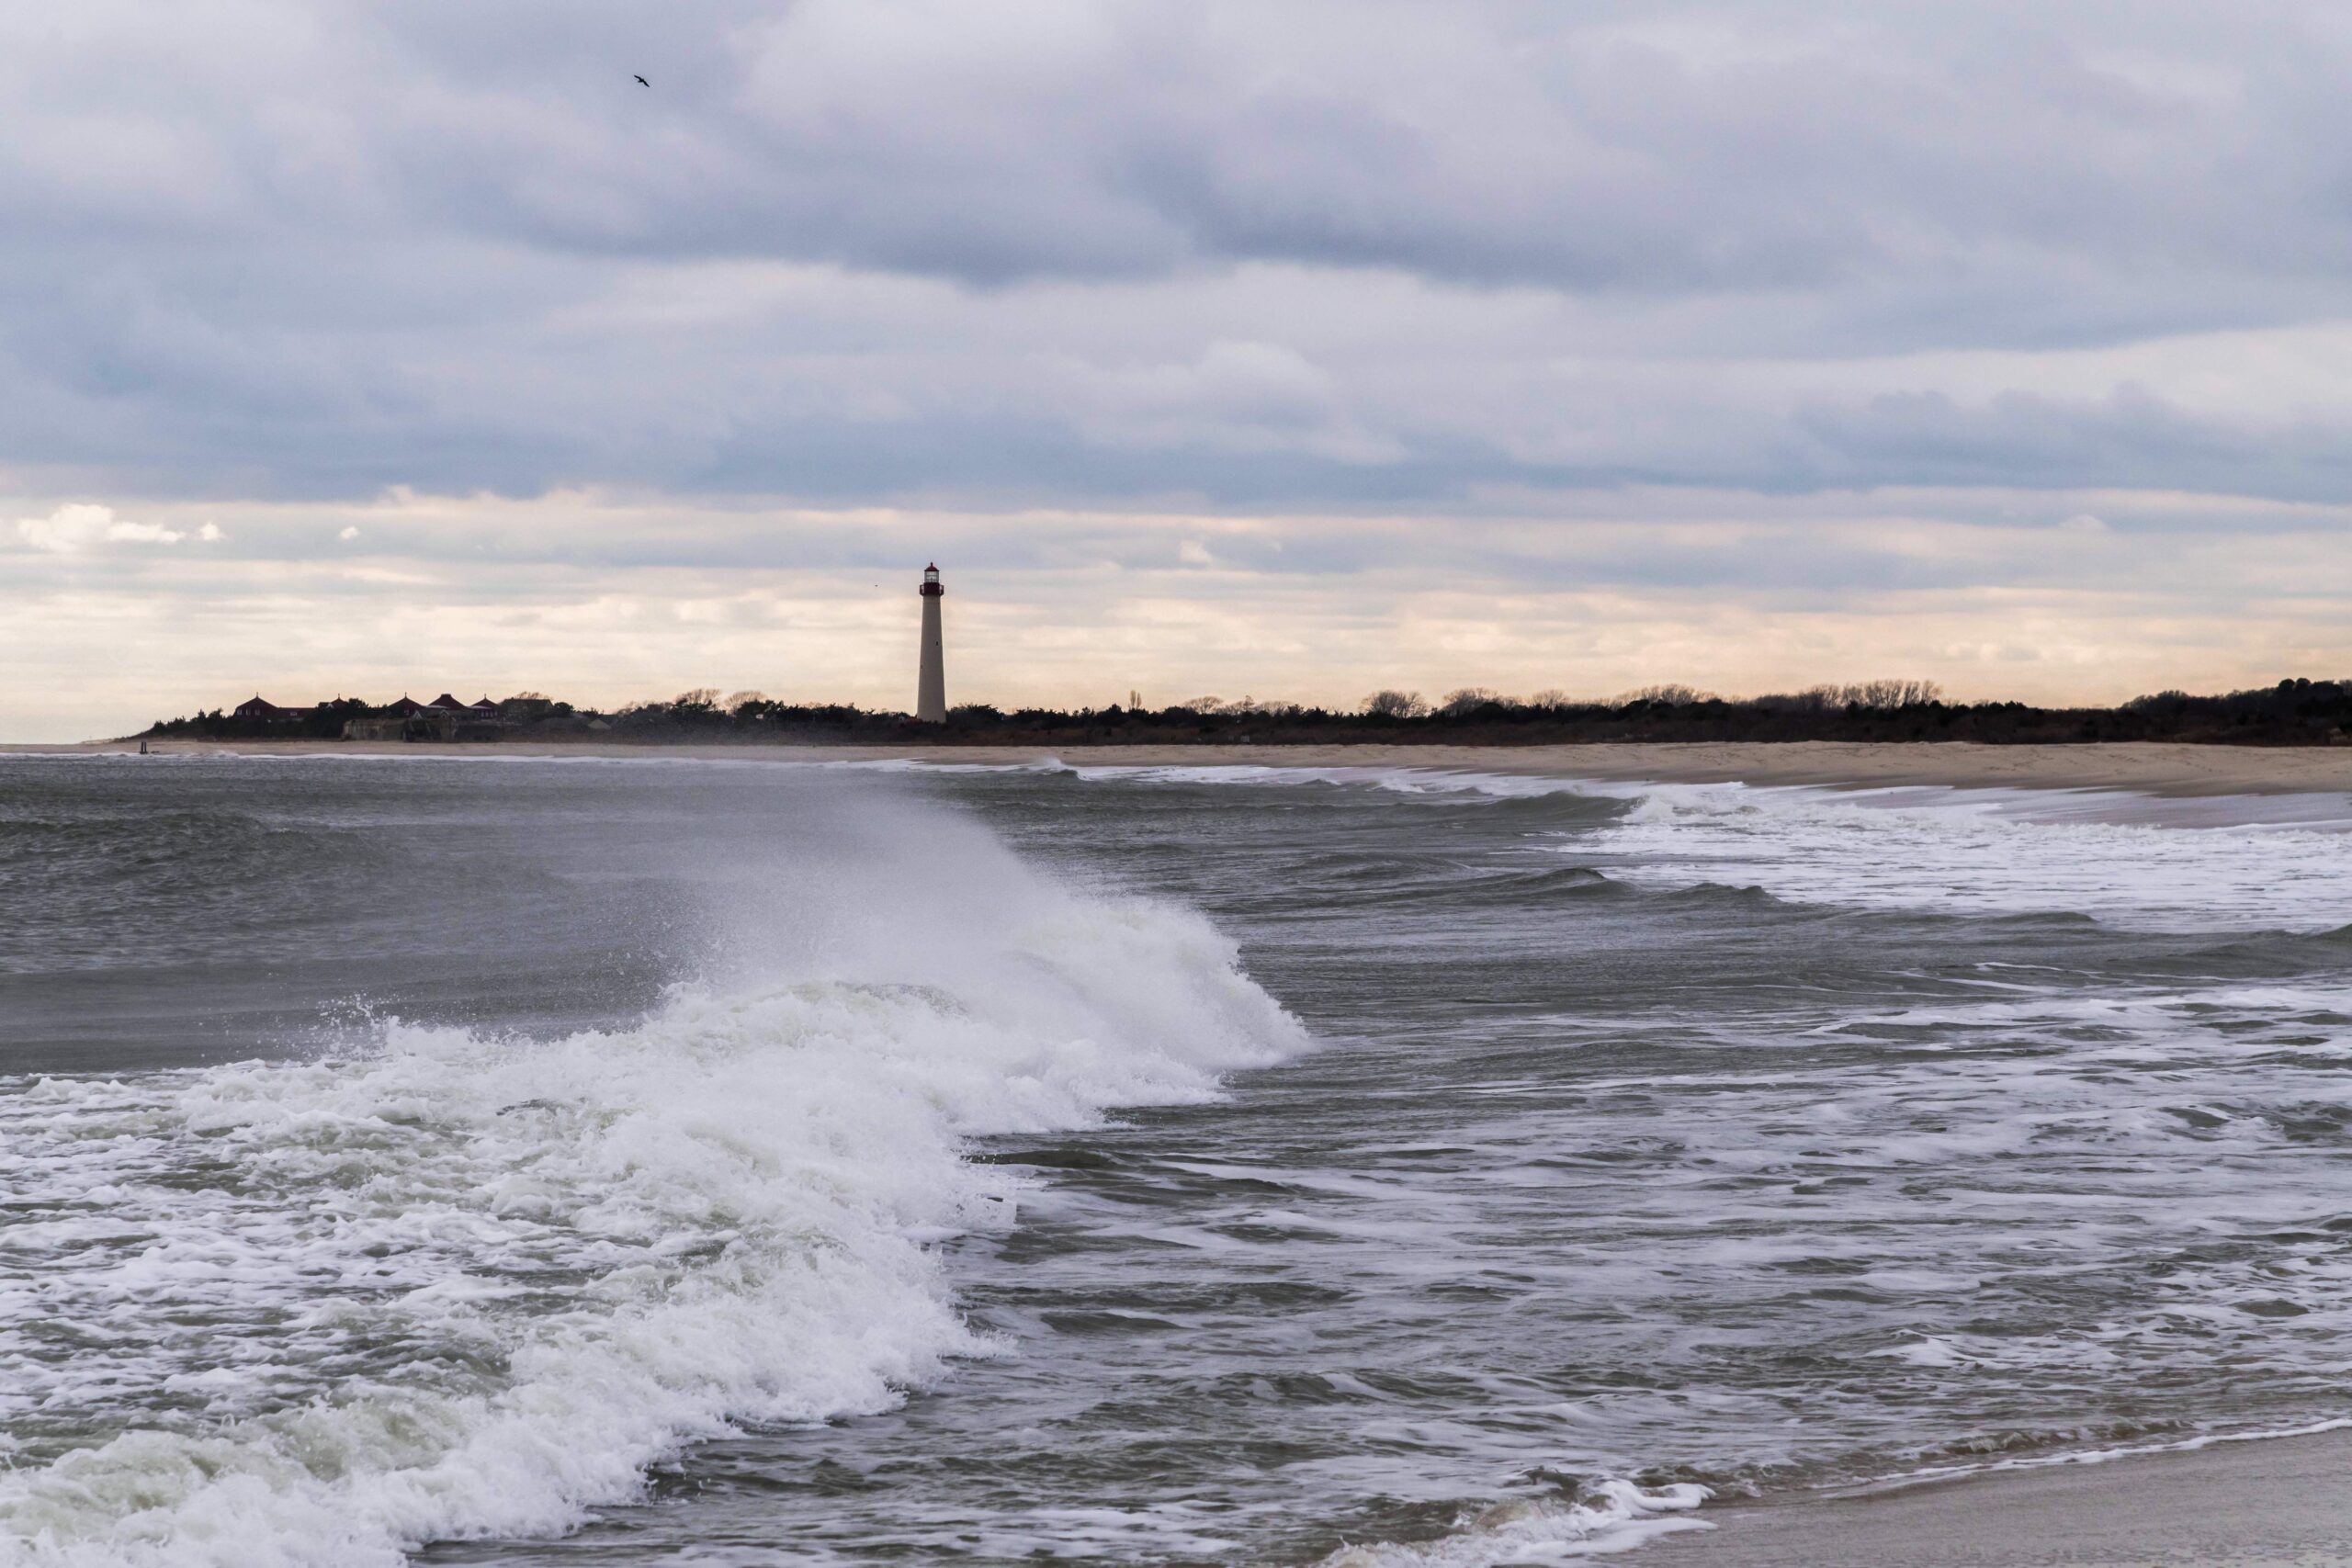 Waves crashing and spraying with the Cape May Lighthouse in the distance and clouds in the sky